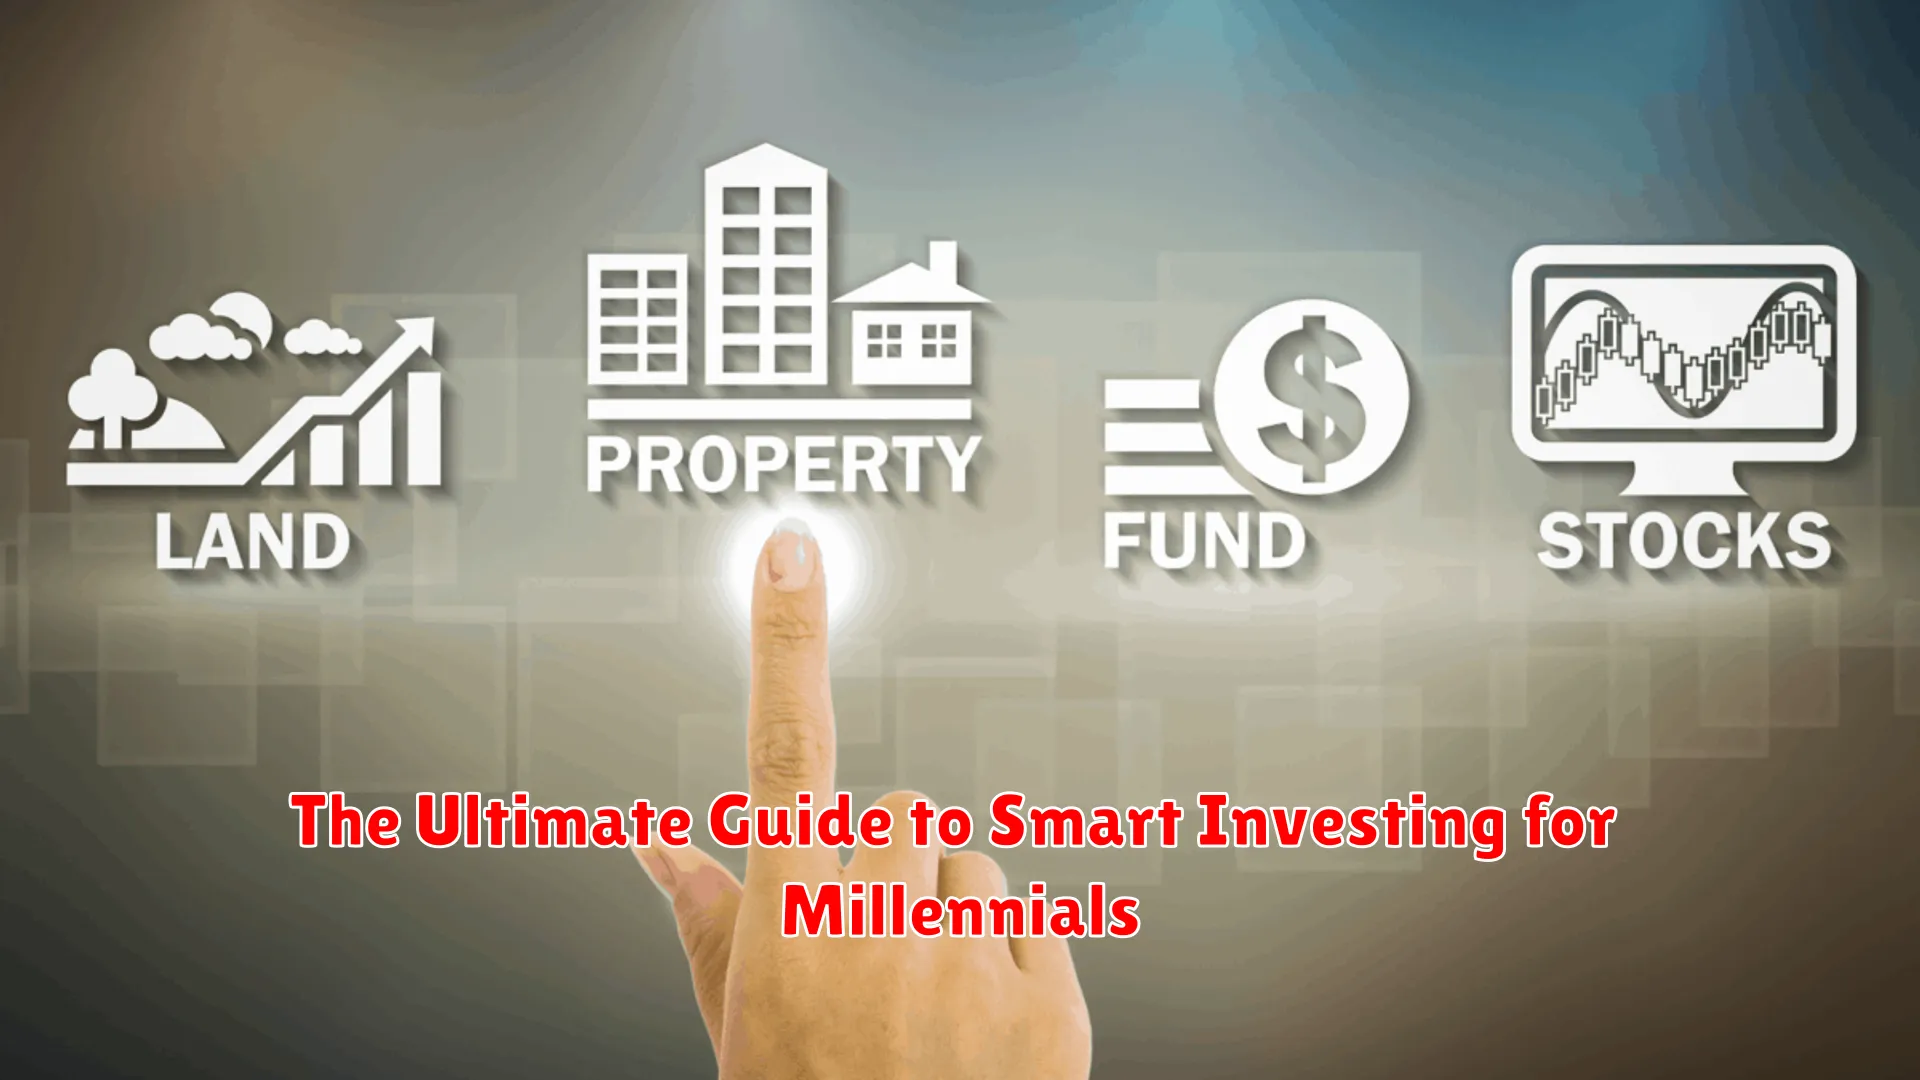 The Ultimate Guide to Smart Investing for Millennials